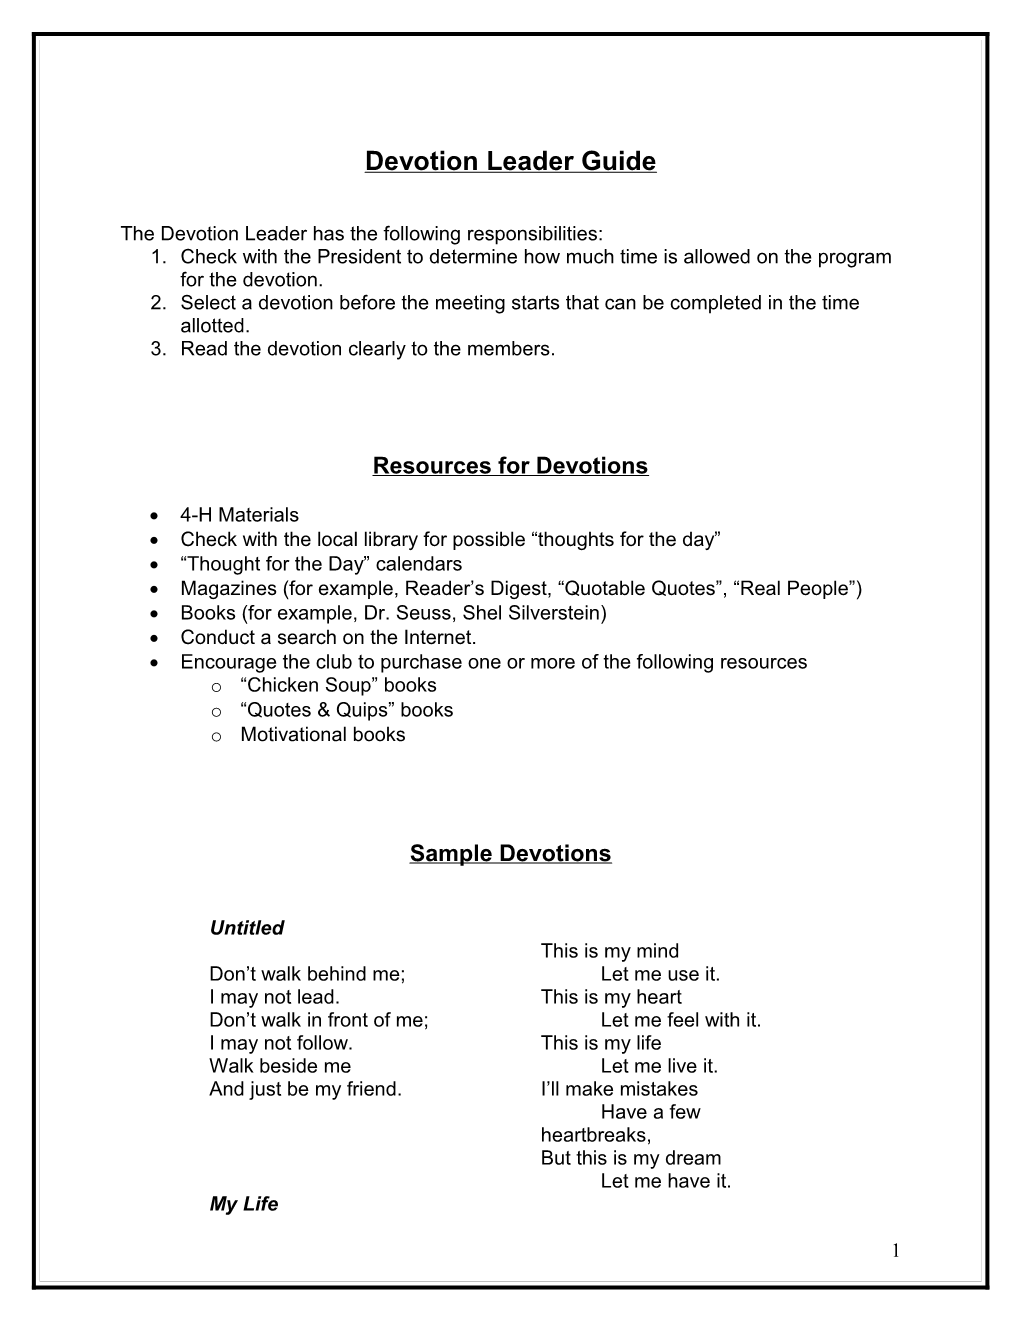 The Devotion Leader Has the Following Responsibilities